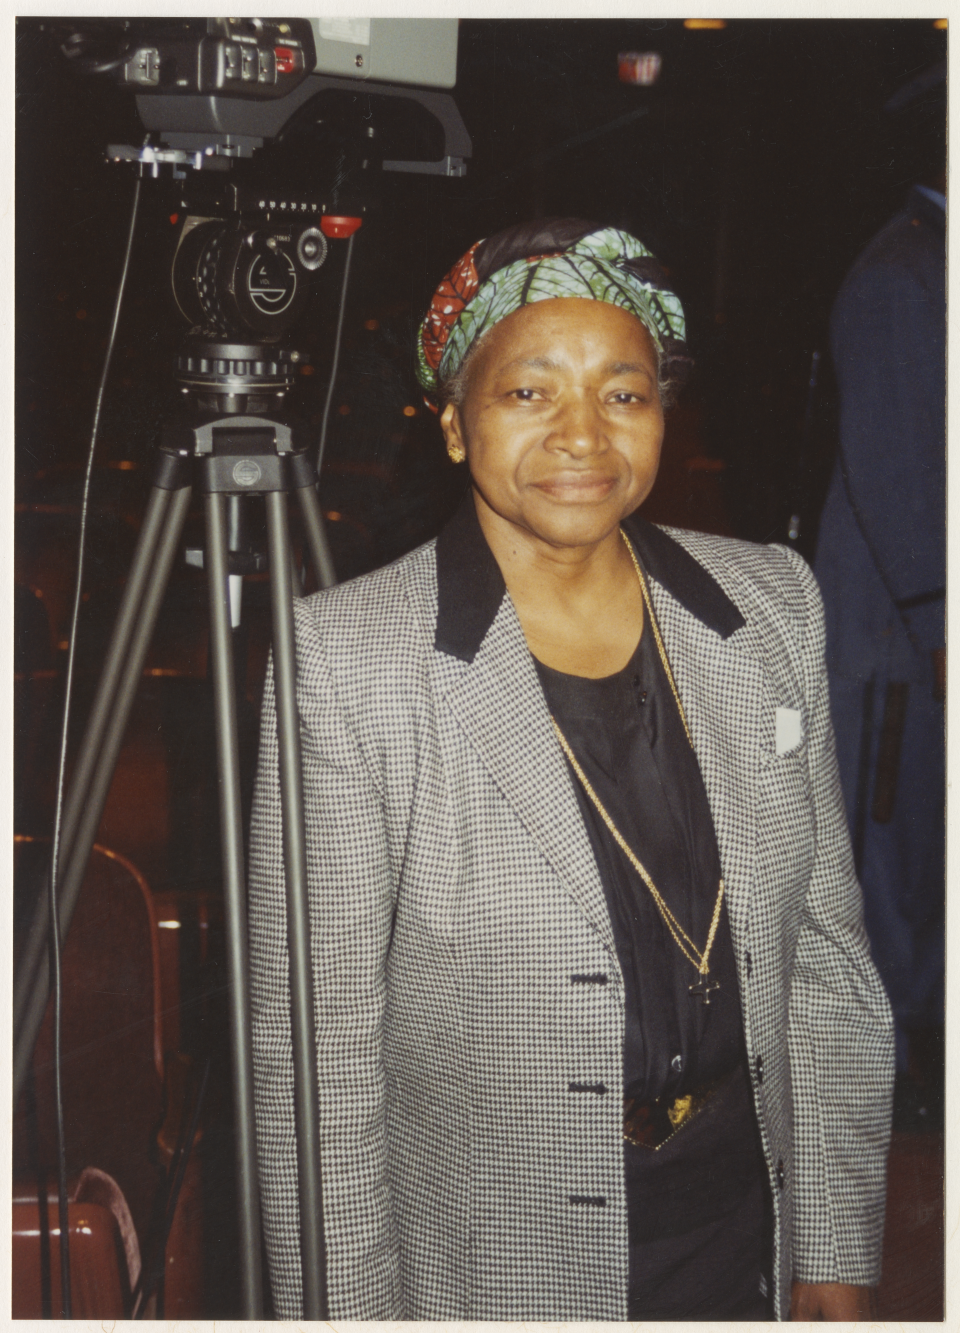 Photo of filmmaker Madeline Anderson shows her standing beside a film camera and tripod. She wears a grey blazer and a multicolored headscarf.